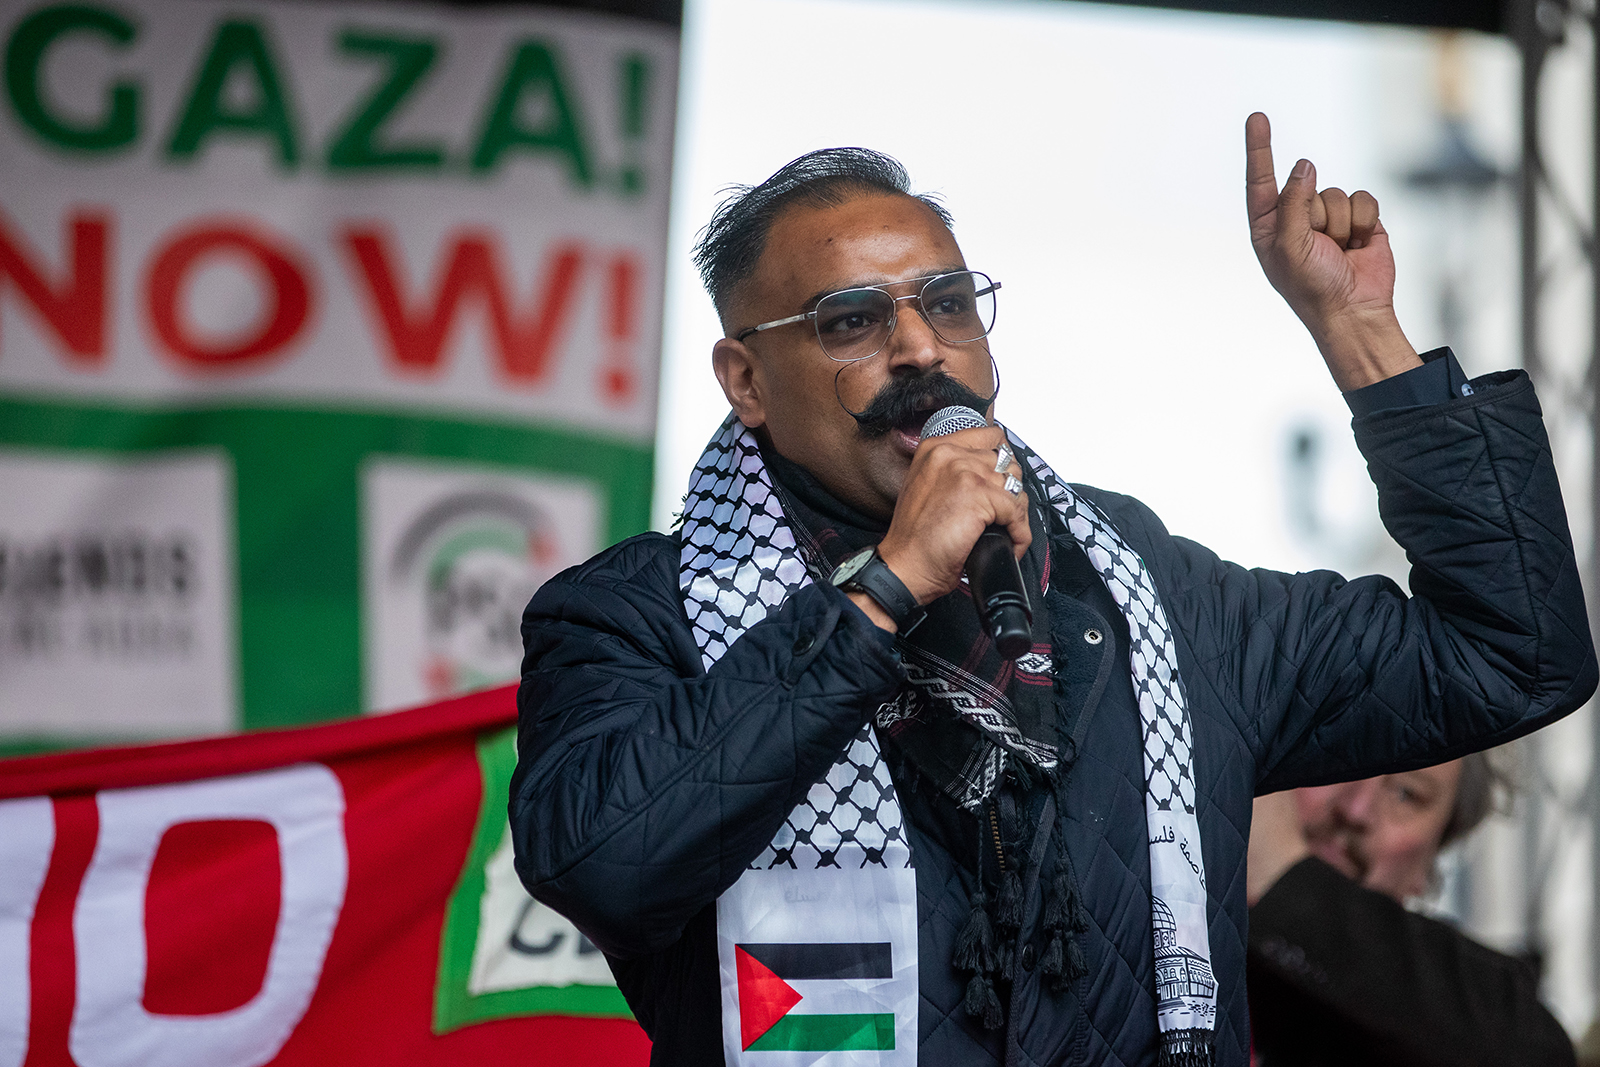 Cllr Ammar Anwar, the Kirklees councillor who resigned from the Labour Party over its stance on current events in Gaza, addresses tens of thousands of pro-Palestinian protesters in Whitehall during a rally to call for an immediate ceasefire in Gaza and an end to Israel's occupation on 3rd February 2024 in London, United Kingdom. The event was organised by Palestine Solidarity Campaign, Stop the War Coalition, Friends of Al-Aqsa, Muslim Association of Britain, Palestinian Forum in Britain and CND. Photo by Mark Kerrison/In Pictures via Getty Images.